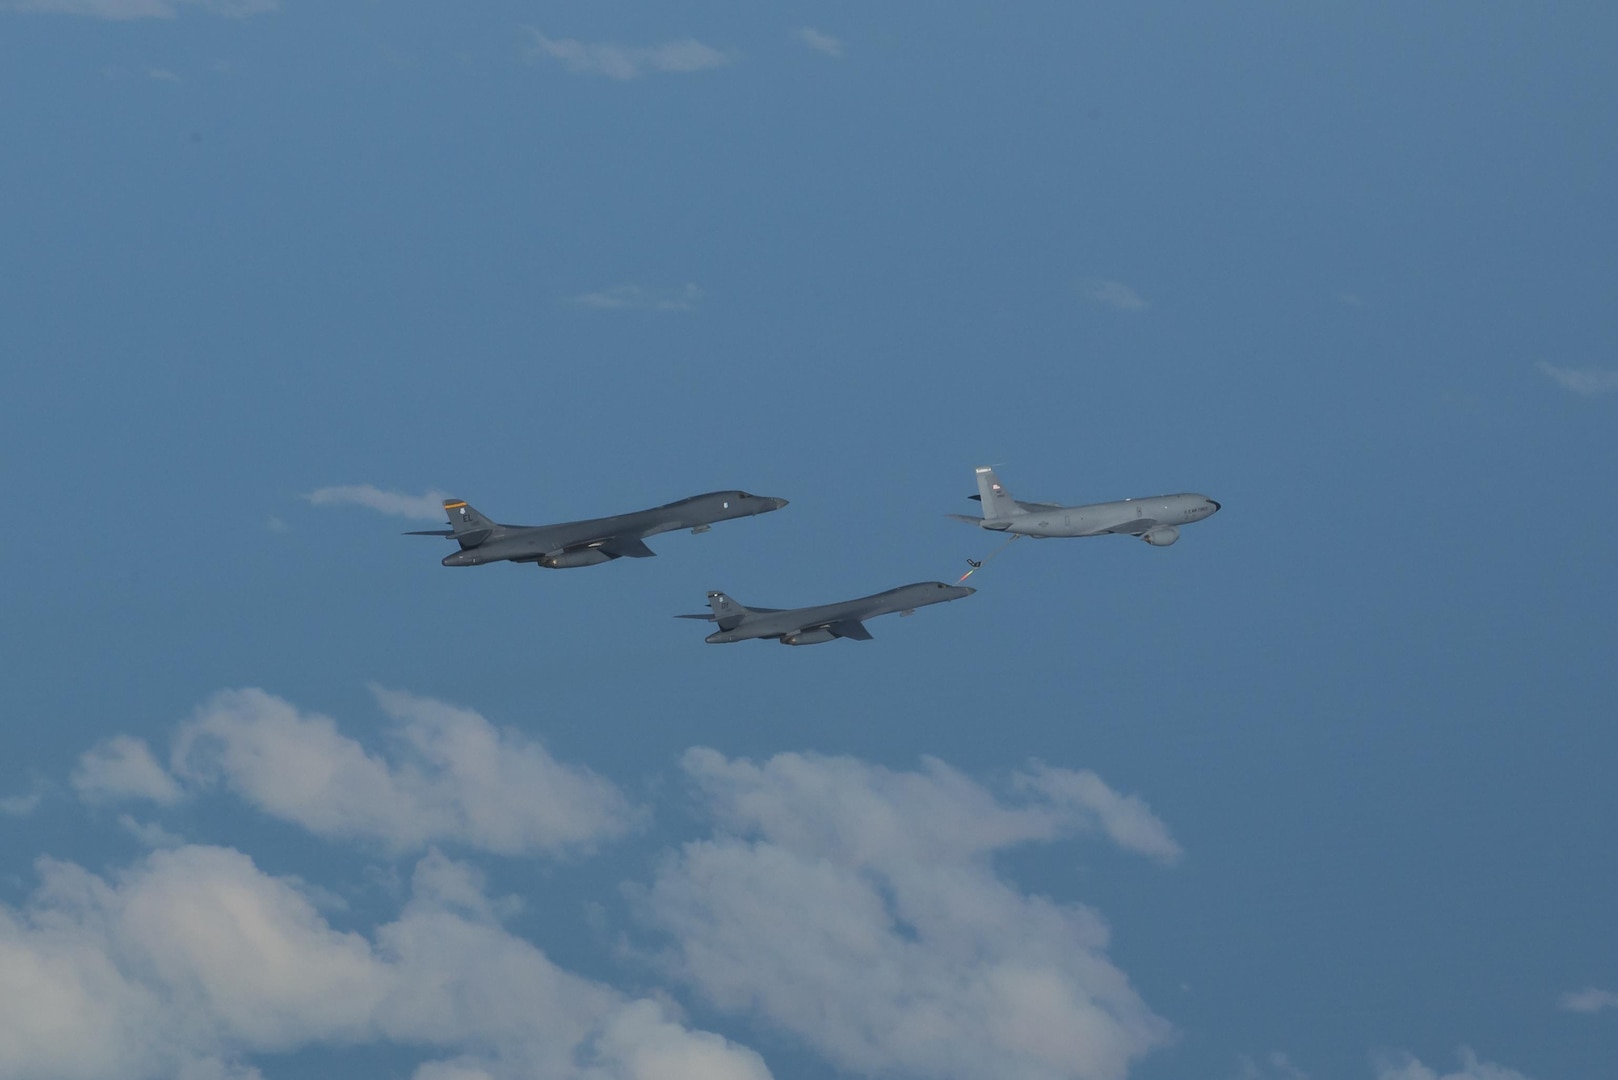 In a demonstration of ironclad U.S. commitment to our allies, two U.S. Air Force B-1B Lancers assigned to the 9th Expeditionary Bomb Squadron, deployed from Dyess Air Force Base, Texas, fly a 10-hour mission from Andersen Air Force Base, Guam, into Japanese airspace and over the Korean Peninsula, July 30, 2017. The B-1s first made contact with Japan Air Self-Defense Force F-2 fighter jets in Japanese airspace, then proceeded over the Korean Peninsula and were joined by South Korean F-15 fighter jets. This mission is in direct response to North Korea’s escalatory launch of intercontinental ballistic missiles on July 3 and 28. (U.S. Air Force photo/Airman 1st Class Christopher Quail)